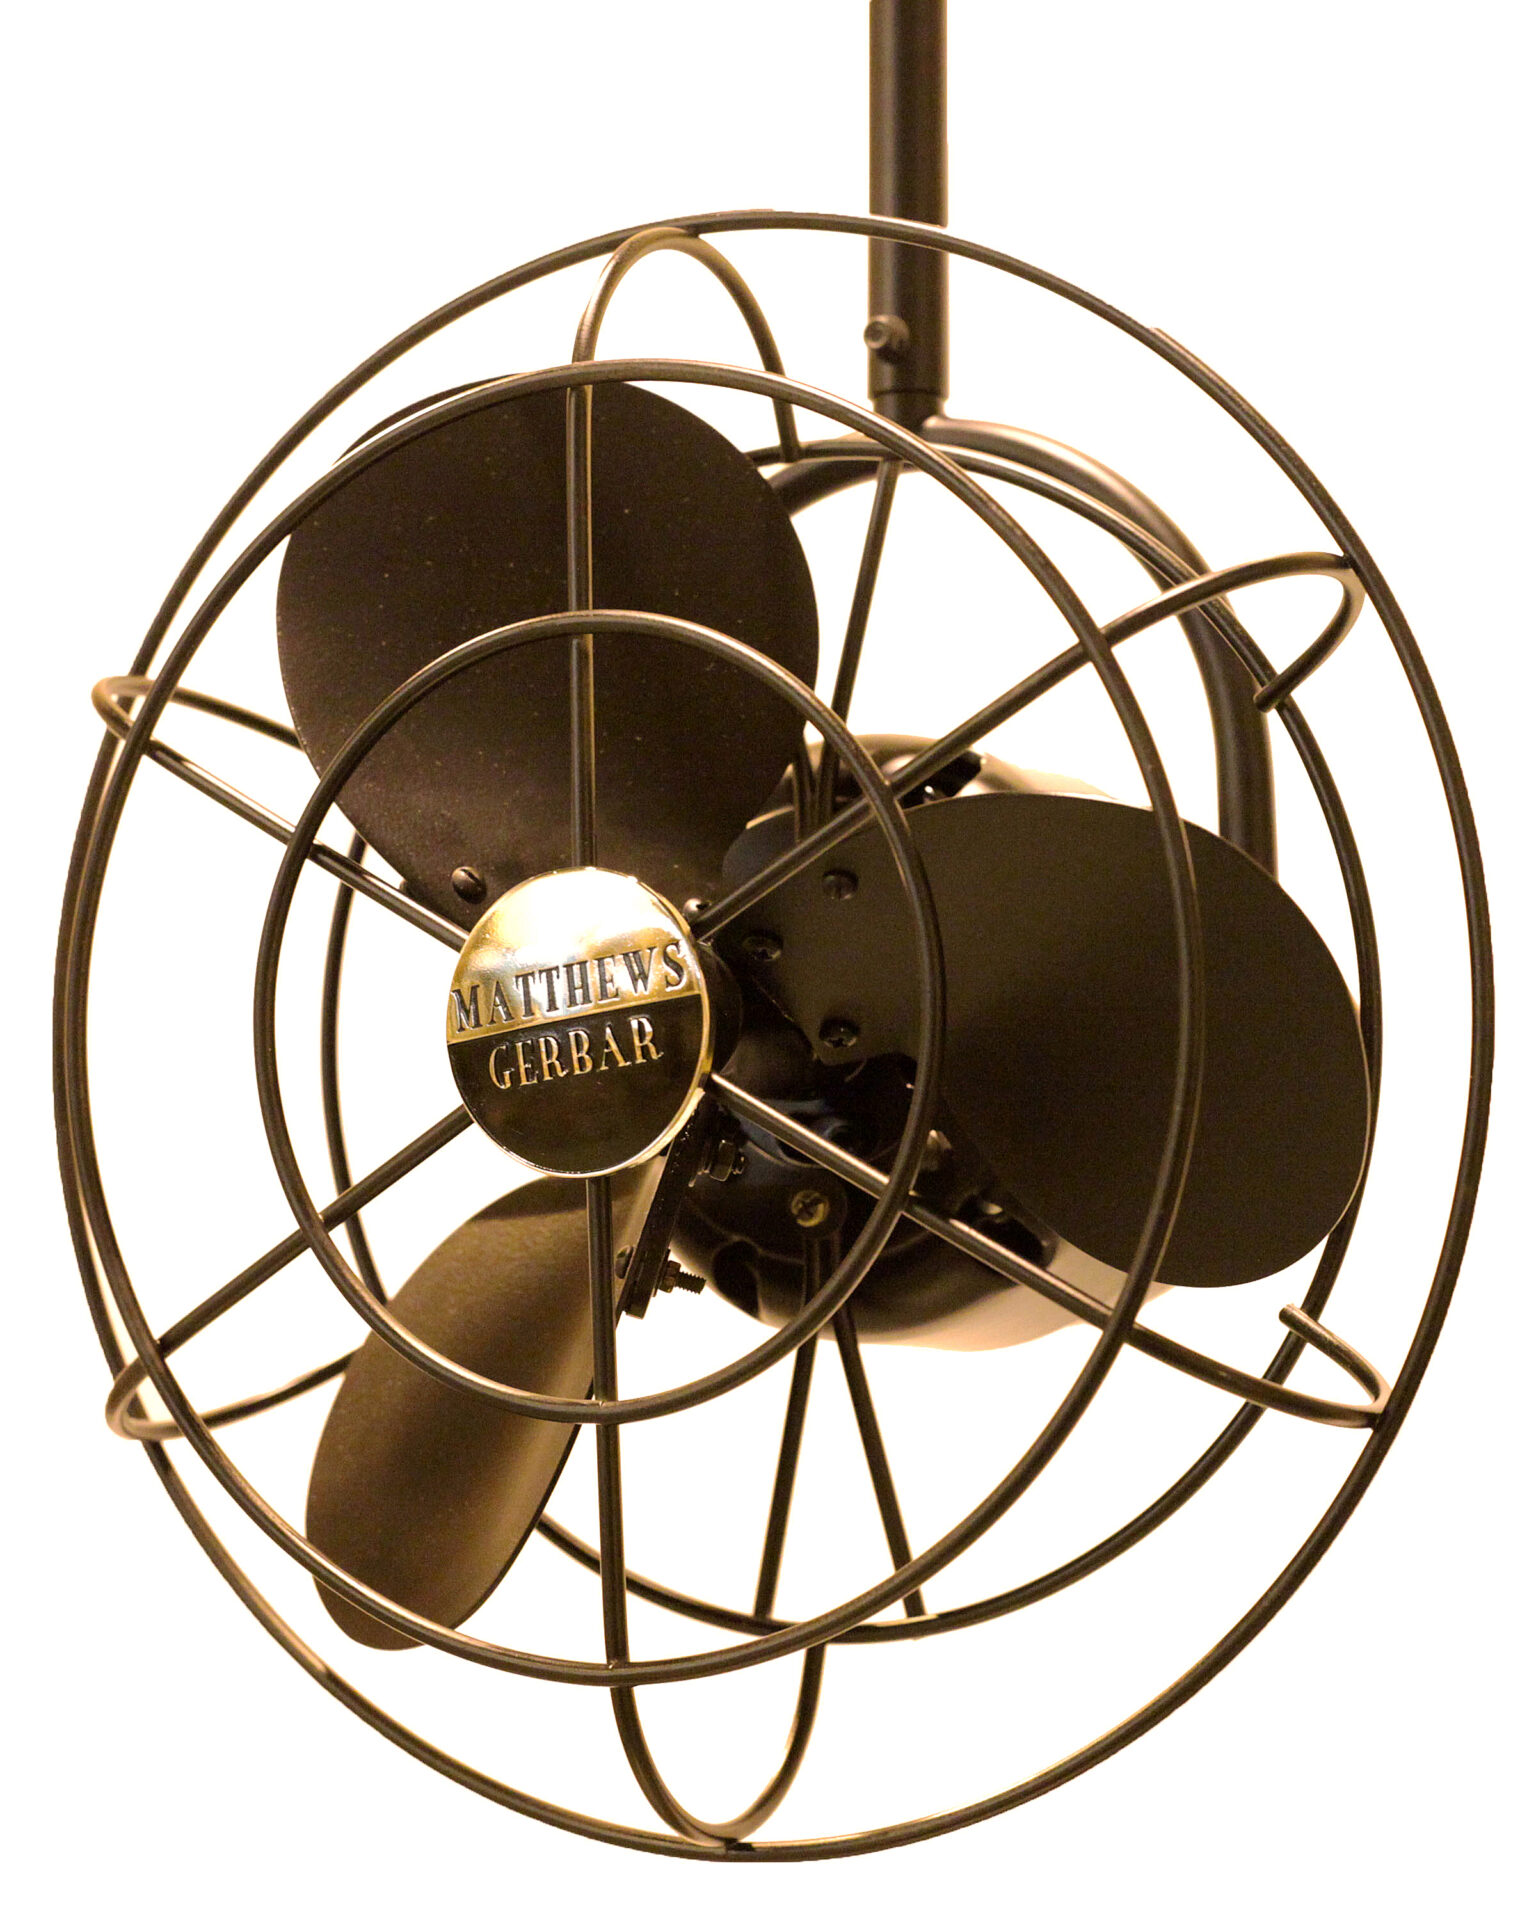 Bianca Direcional ceiling fan in Bronzette with metal blades and decorative cage made by Matthews Fan Company.